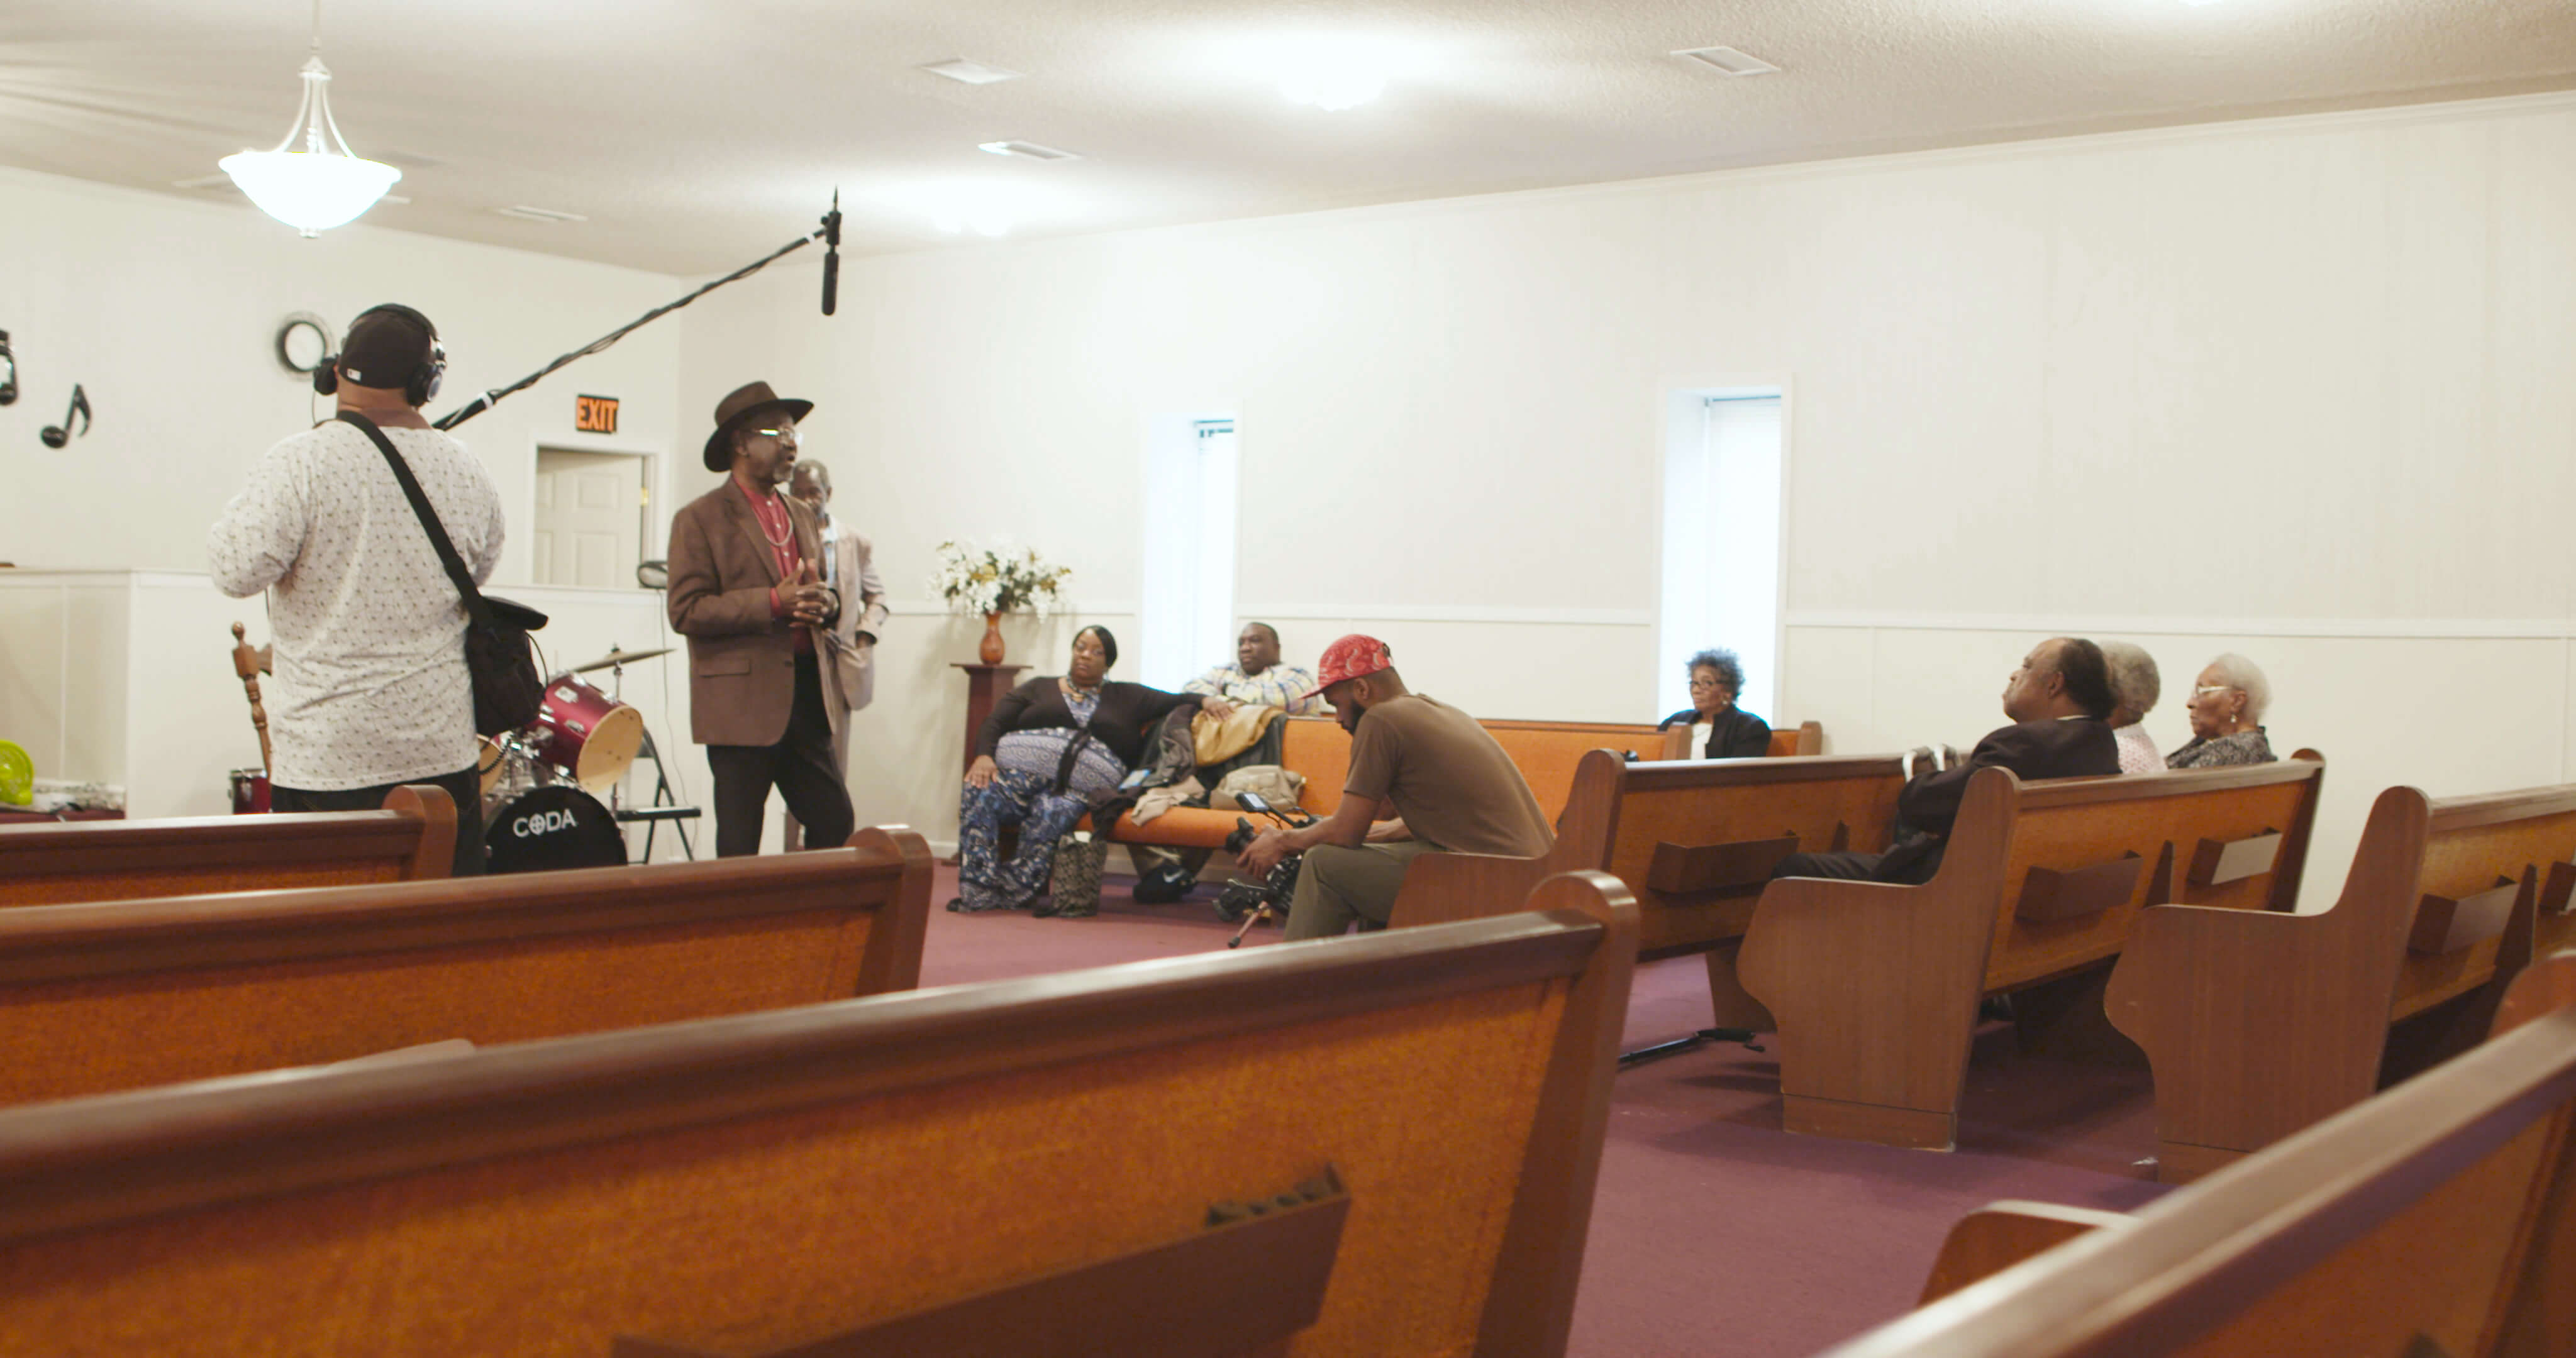 Production still from Frank Bey: You're Going to Miss Me. A man in a brown jacket and wide brimmed hat is addressing a group of people sitting in a wooden pews inside a building. Another is holding a boom mic above him.